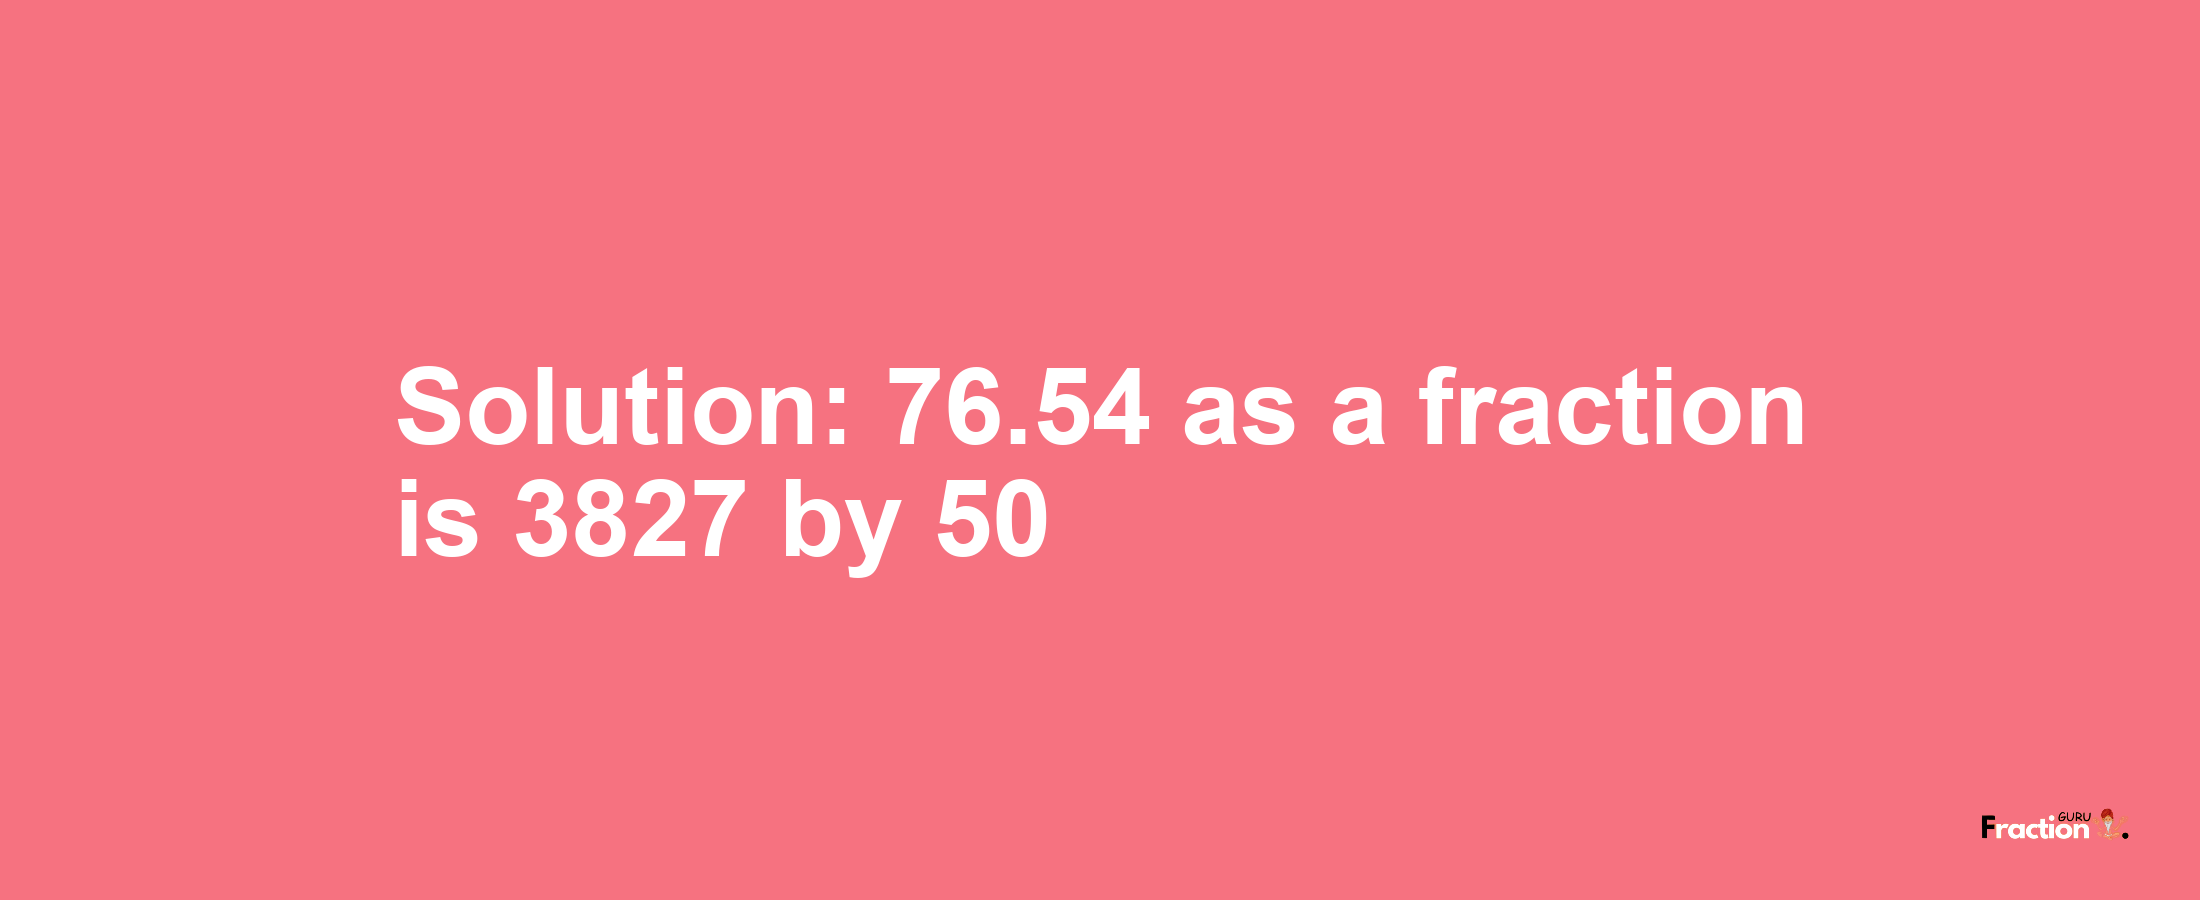 Solution:76.54 as a fraction is 3827/50